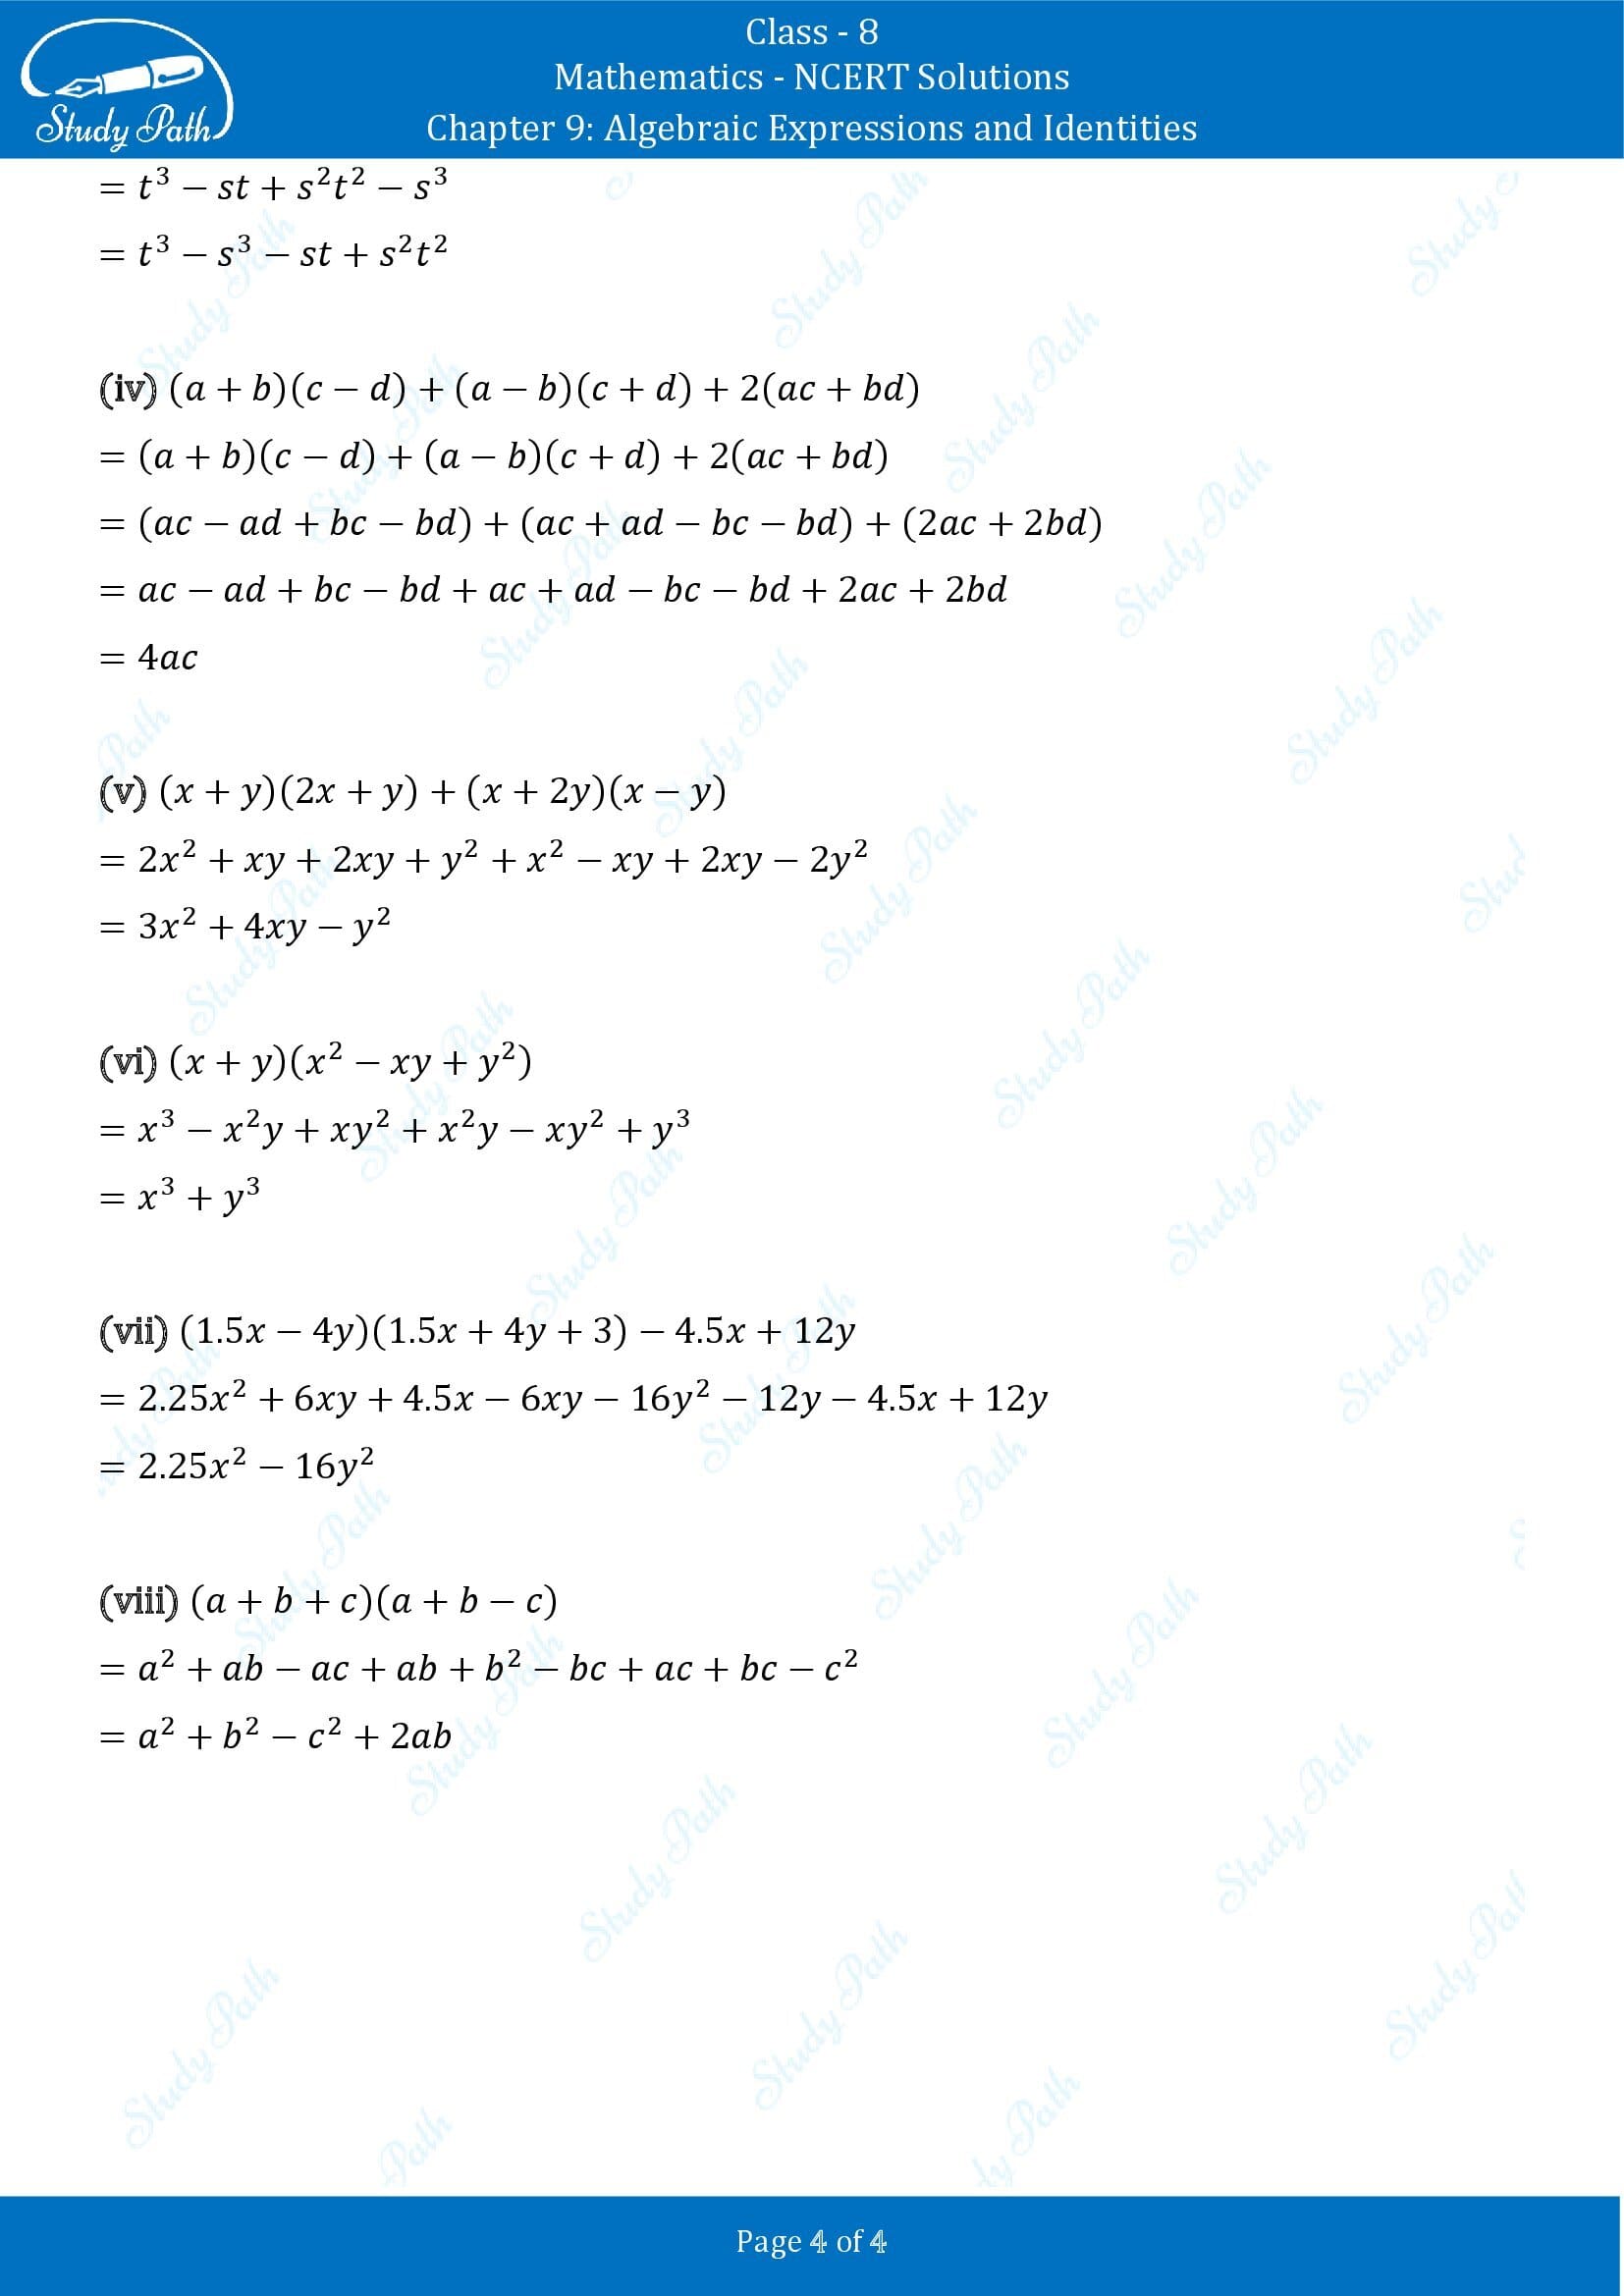 NCERT Solutions for Class 8 Maths Chapter 9 Algebraic Expressions and Identities Exercise 9.4 00004